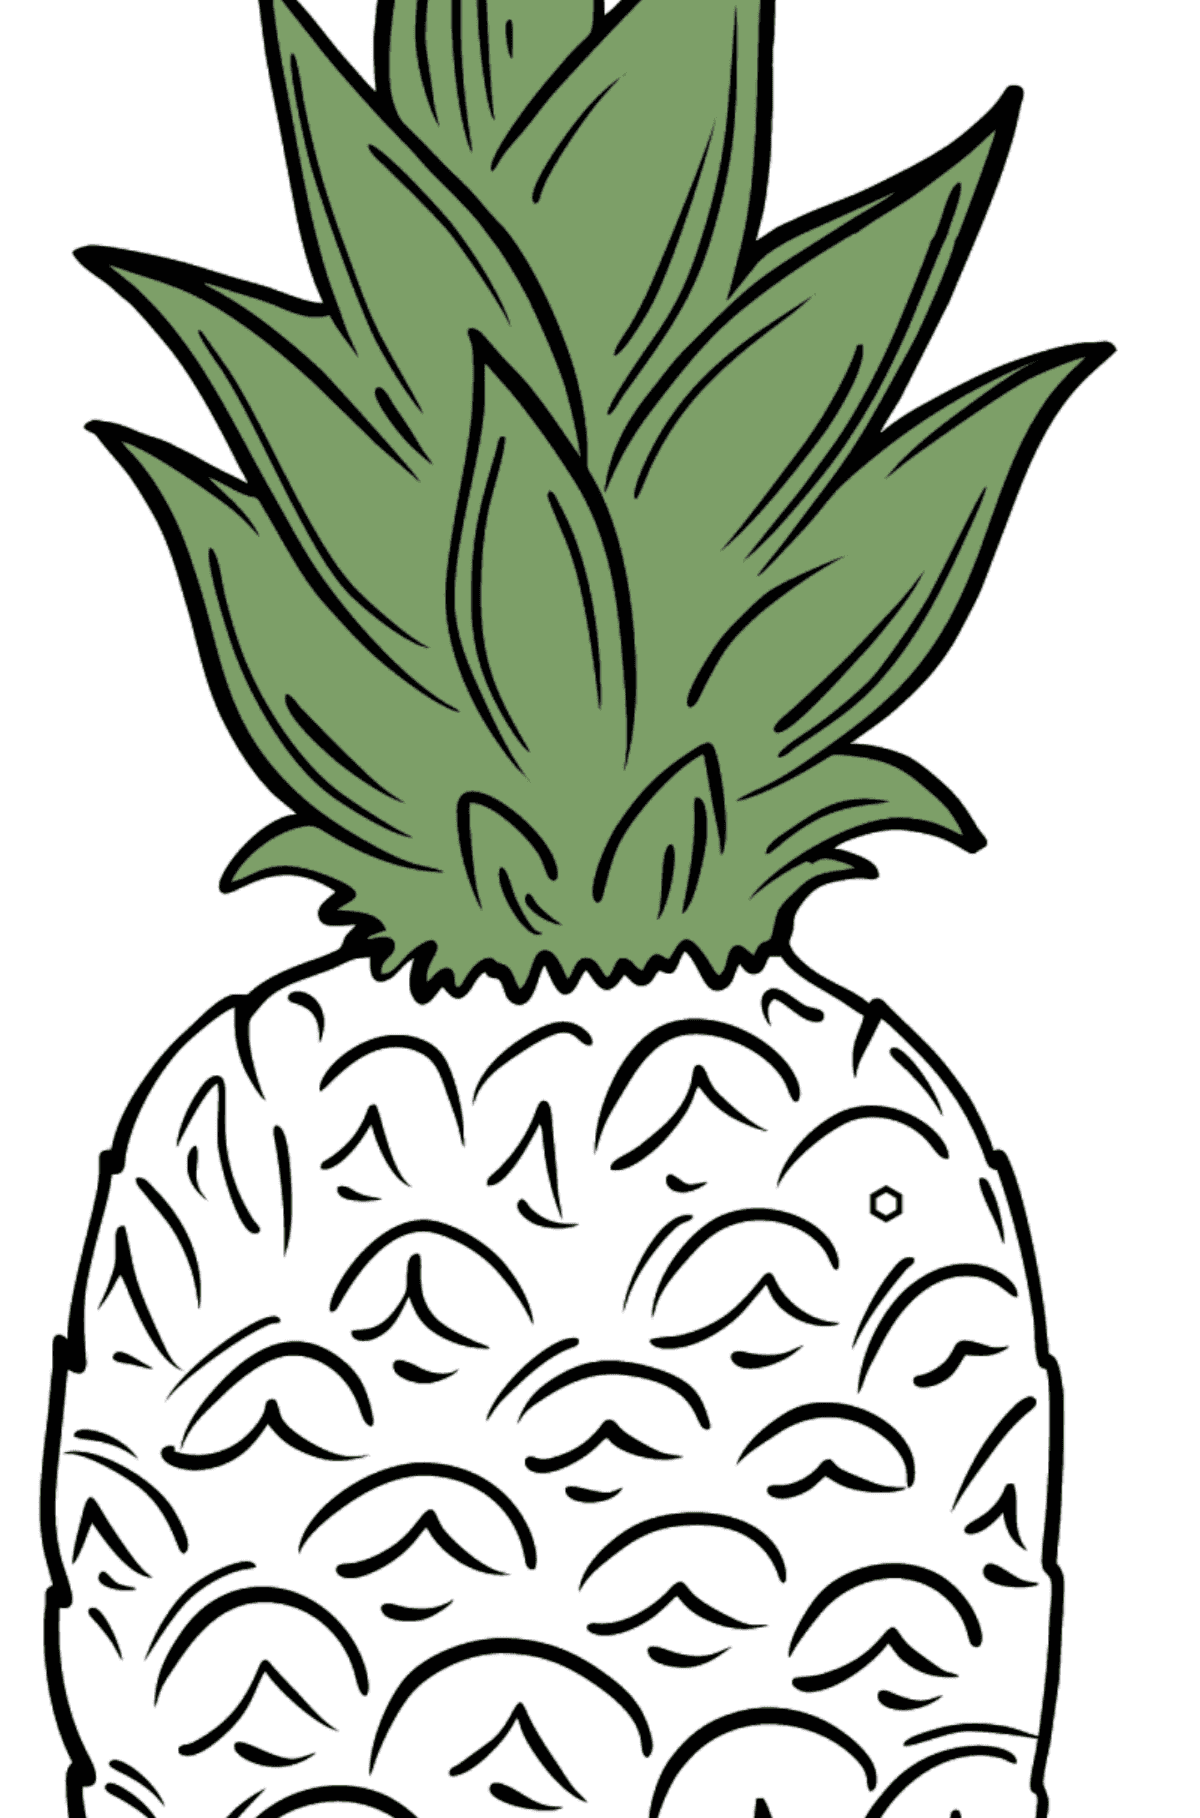 Pineapple coloring page - Coloring by Geometric Shapes for Kids